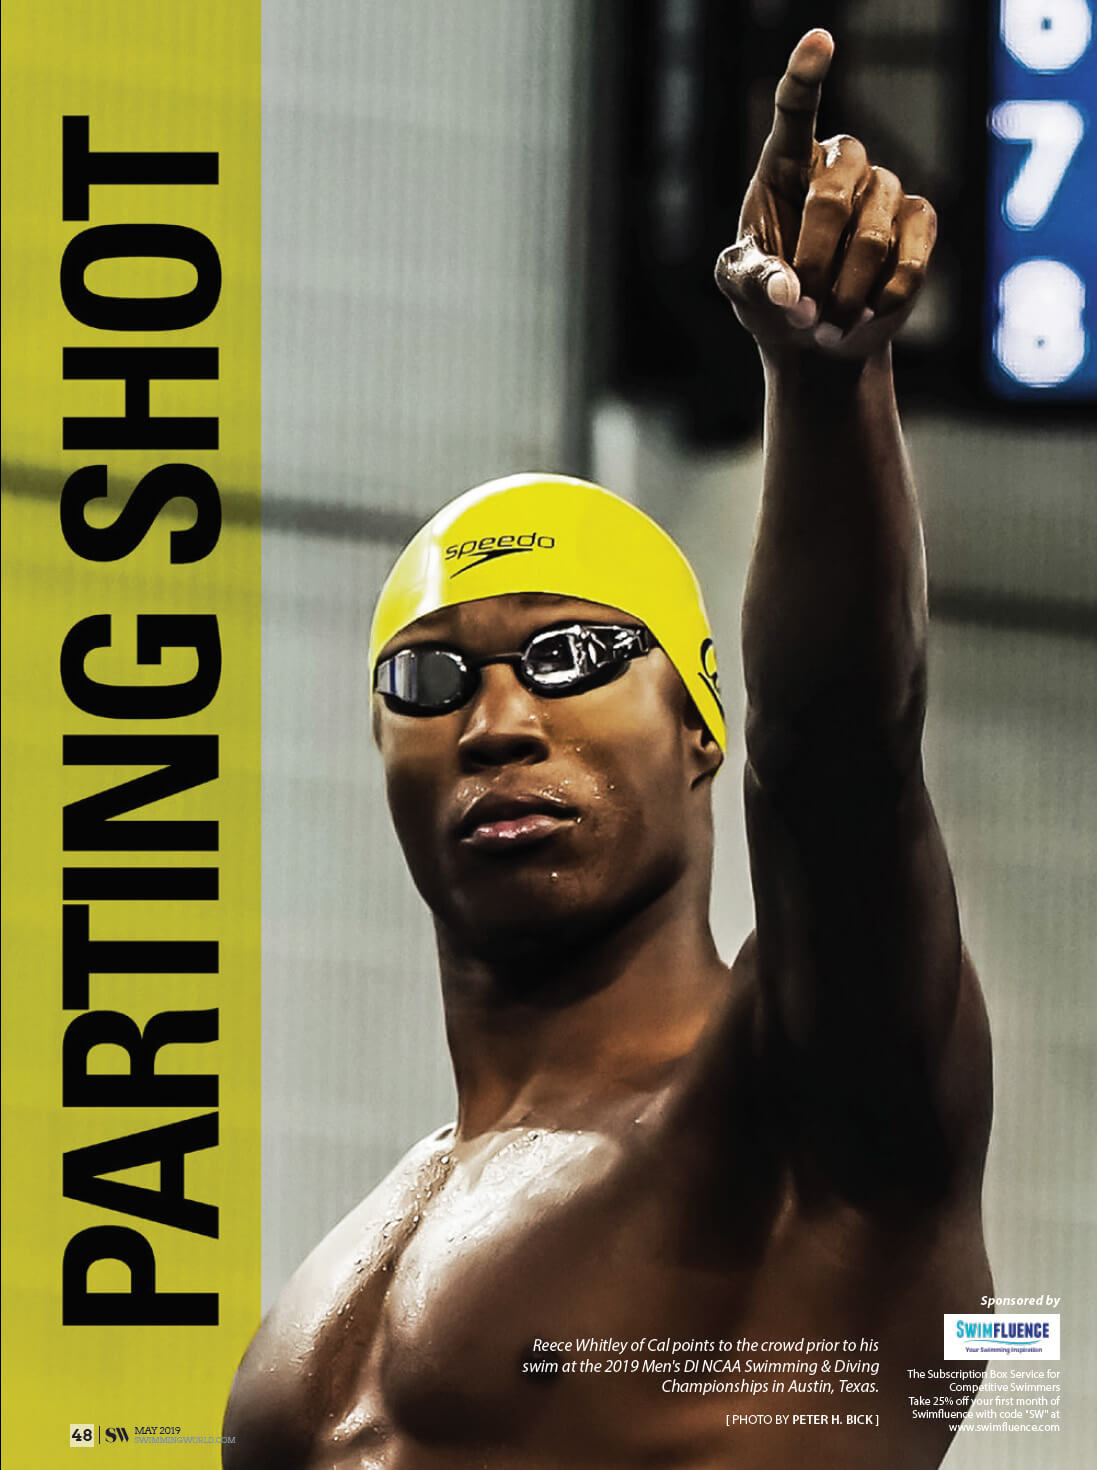 Swimming World Magazine - Parting Shot May 2019 Reece Whitley of Cal Golden Bears